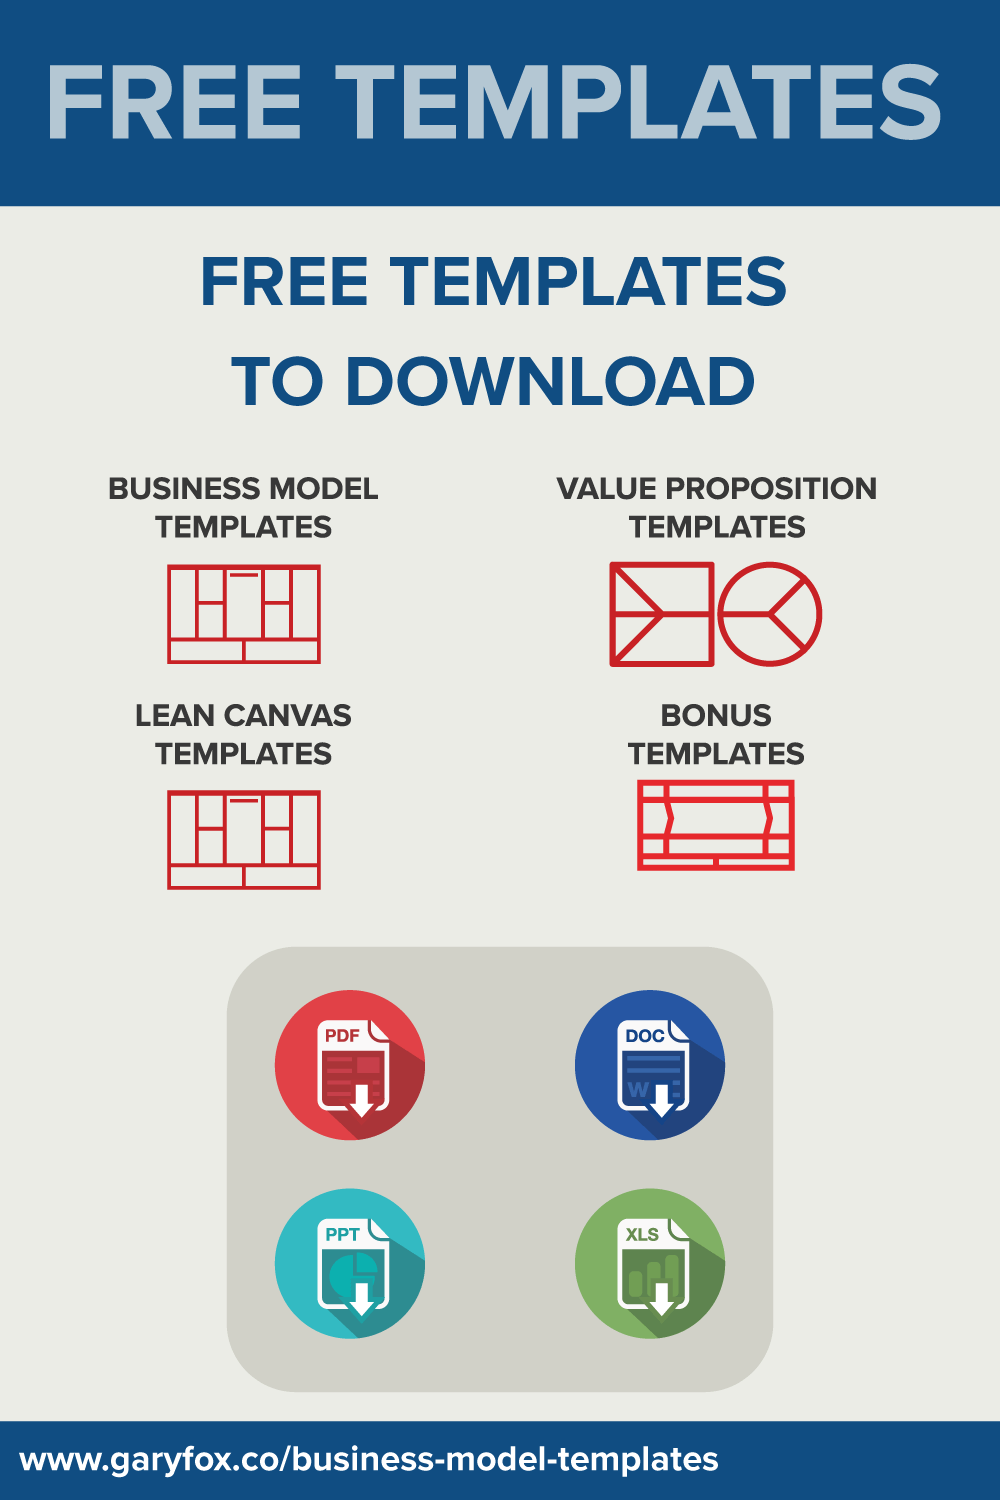 Business Model Templates: 12 Free Templates Pdf, Word, Excel And Ppt